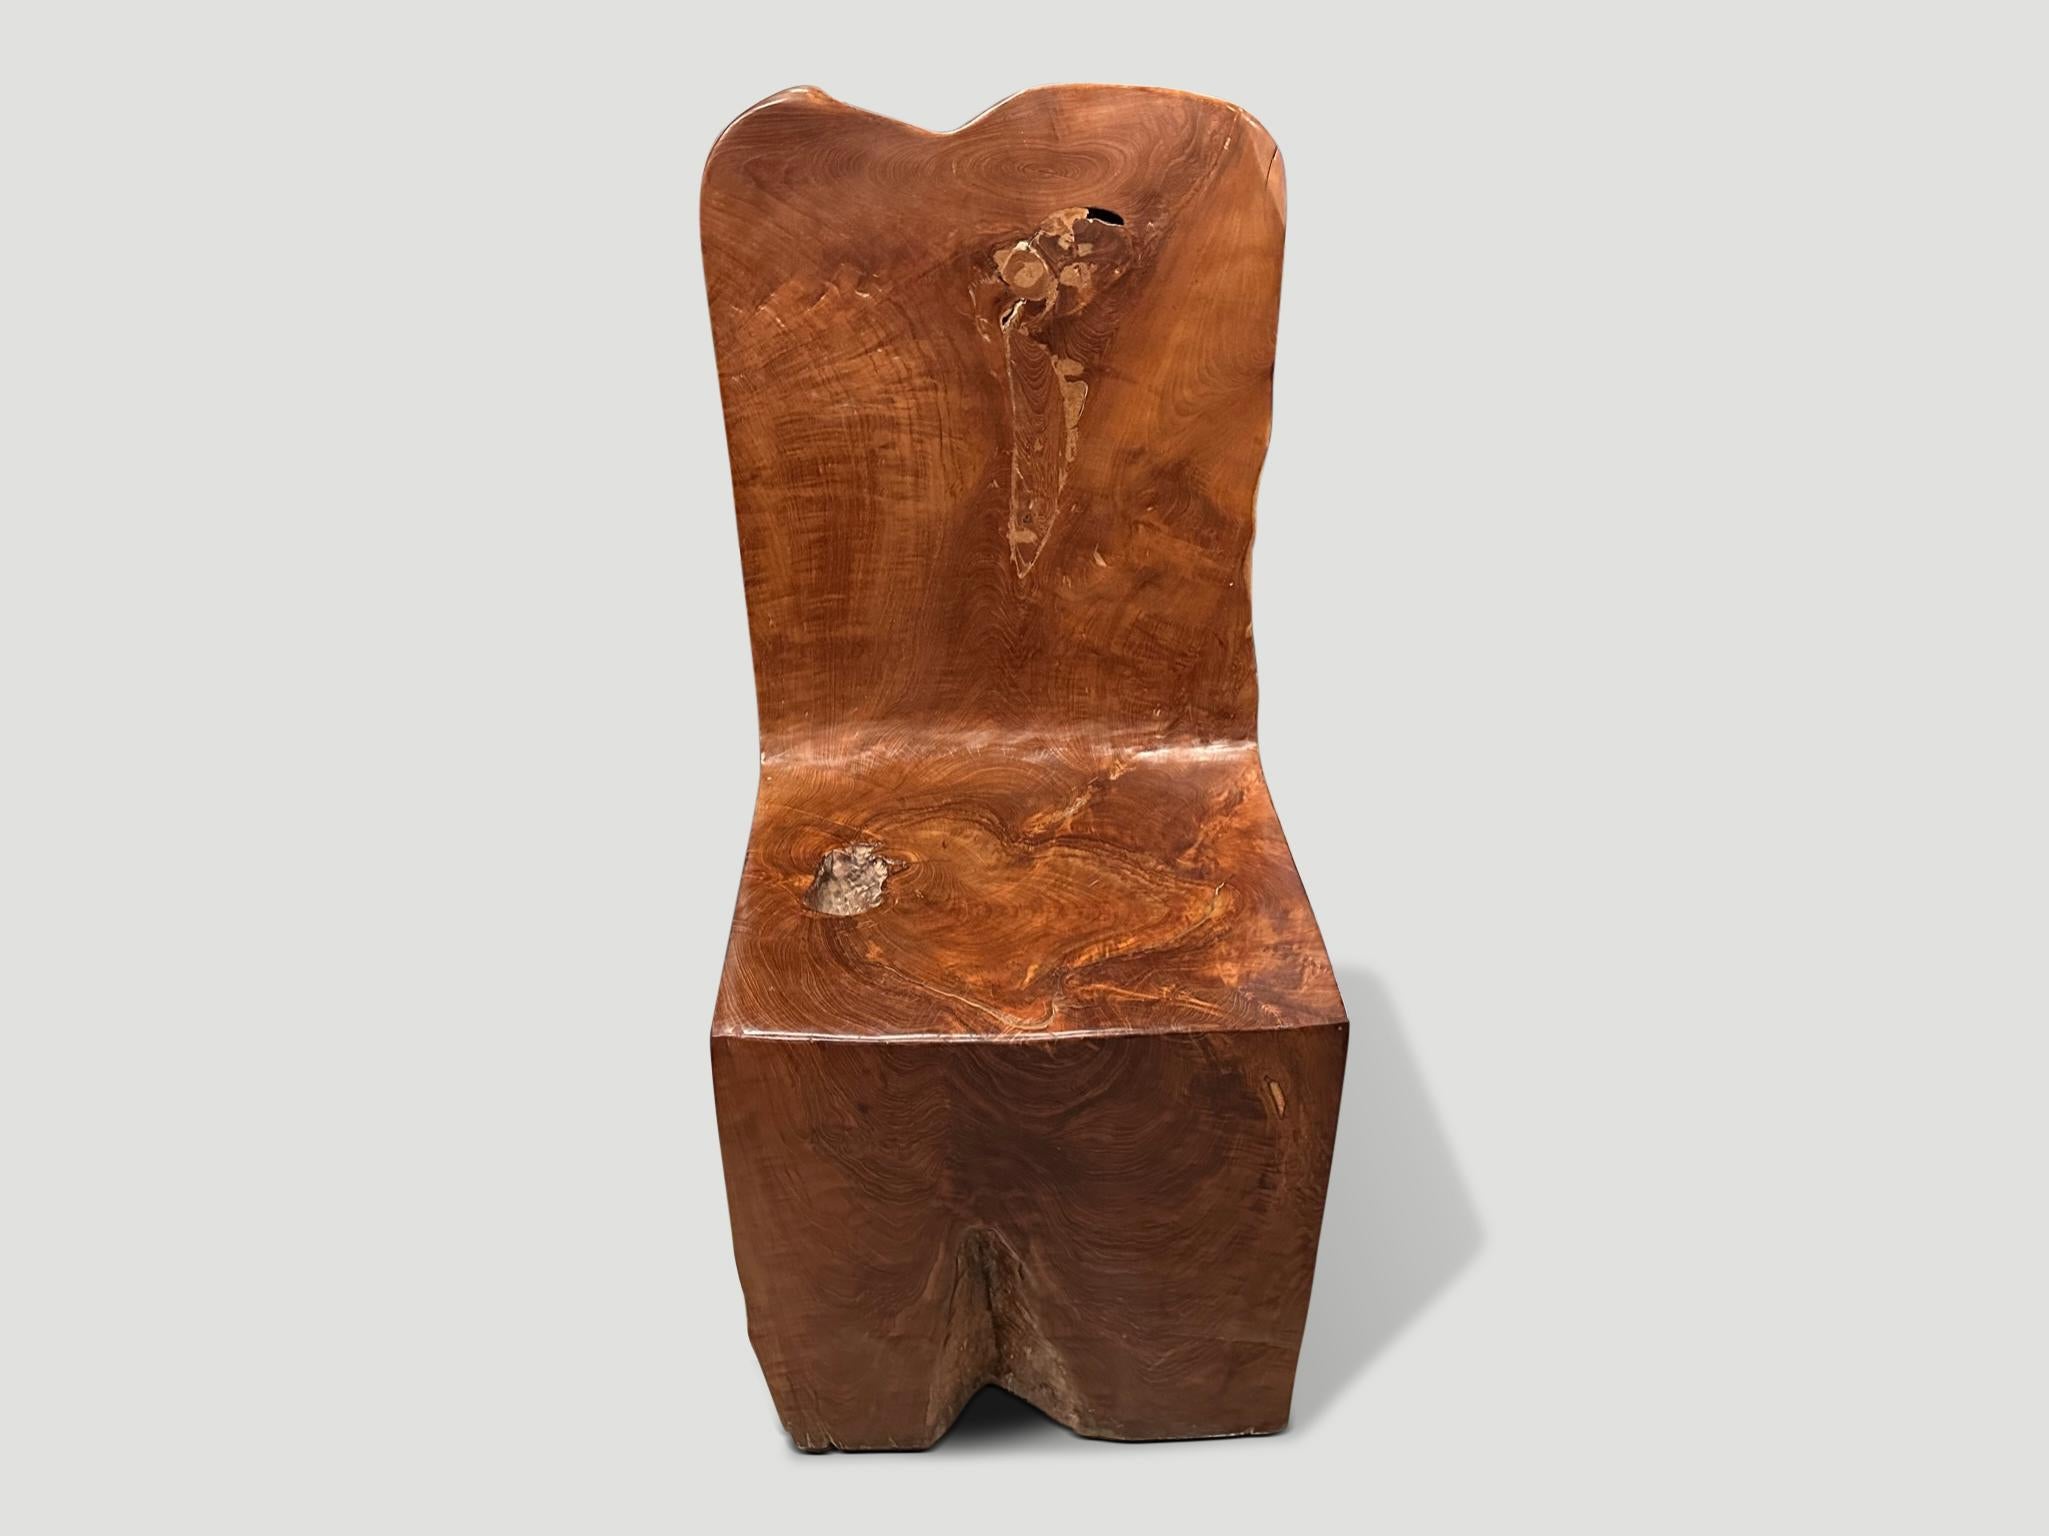 Beautiful aged teak wood hand carved chair. A single block of wood has been hand carved into this solid teak sculptural chair whilst respecting the natural organic wood. We have a set of four. The price and images reflect the one shown. Full